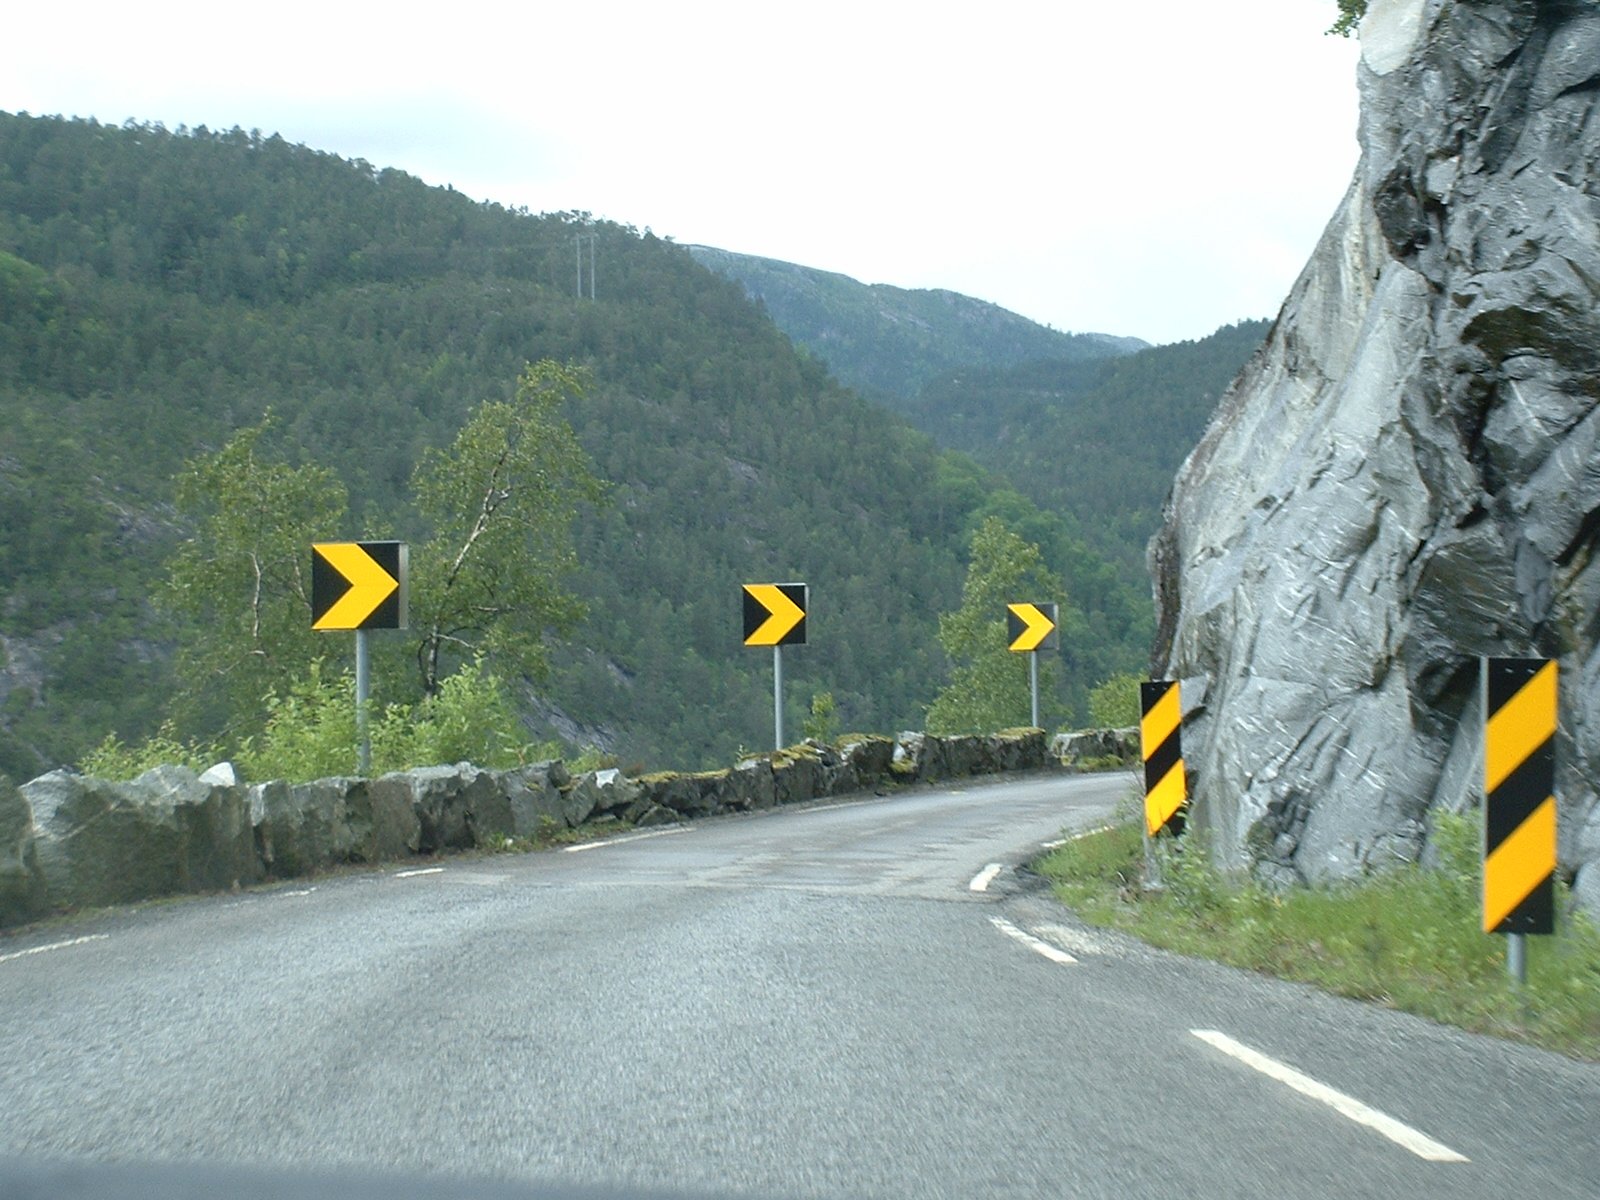 several yellow traffic signs on a mountain road